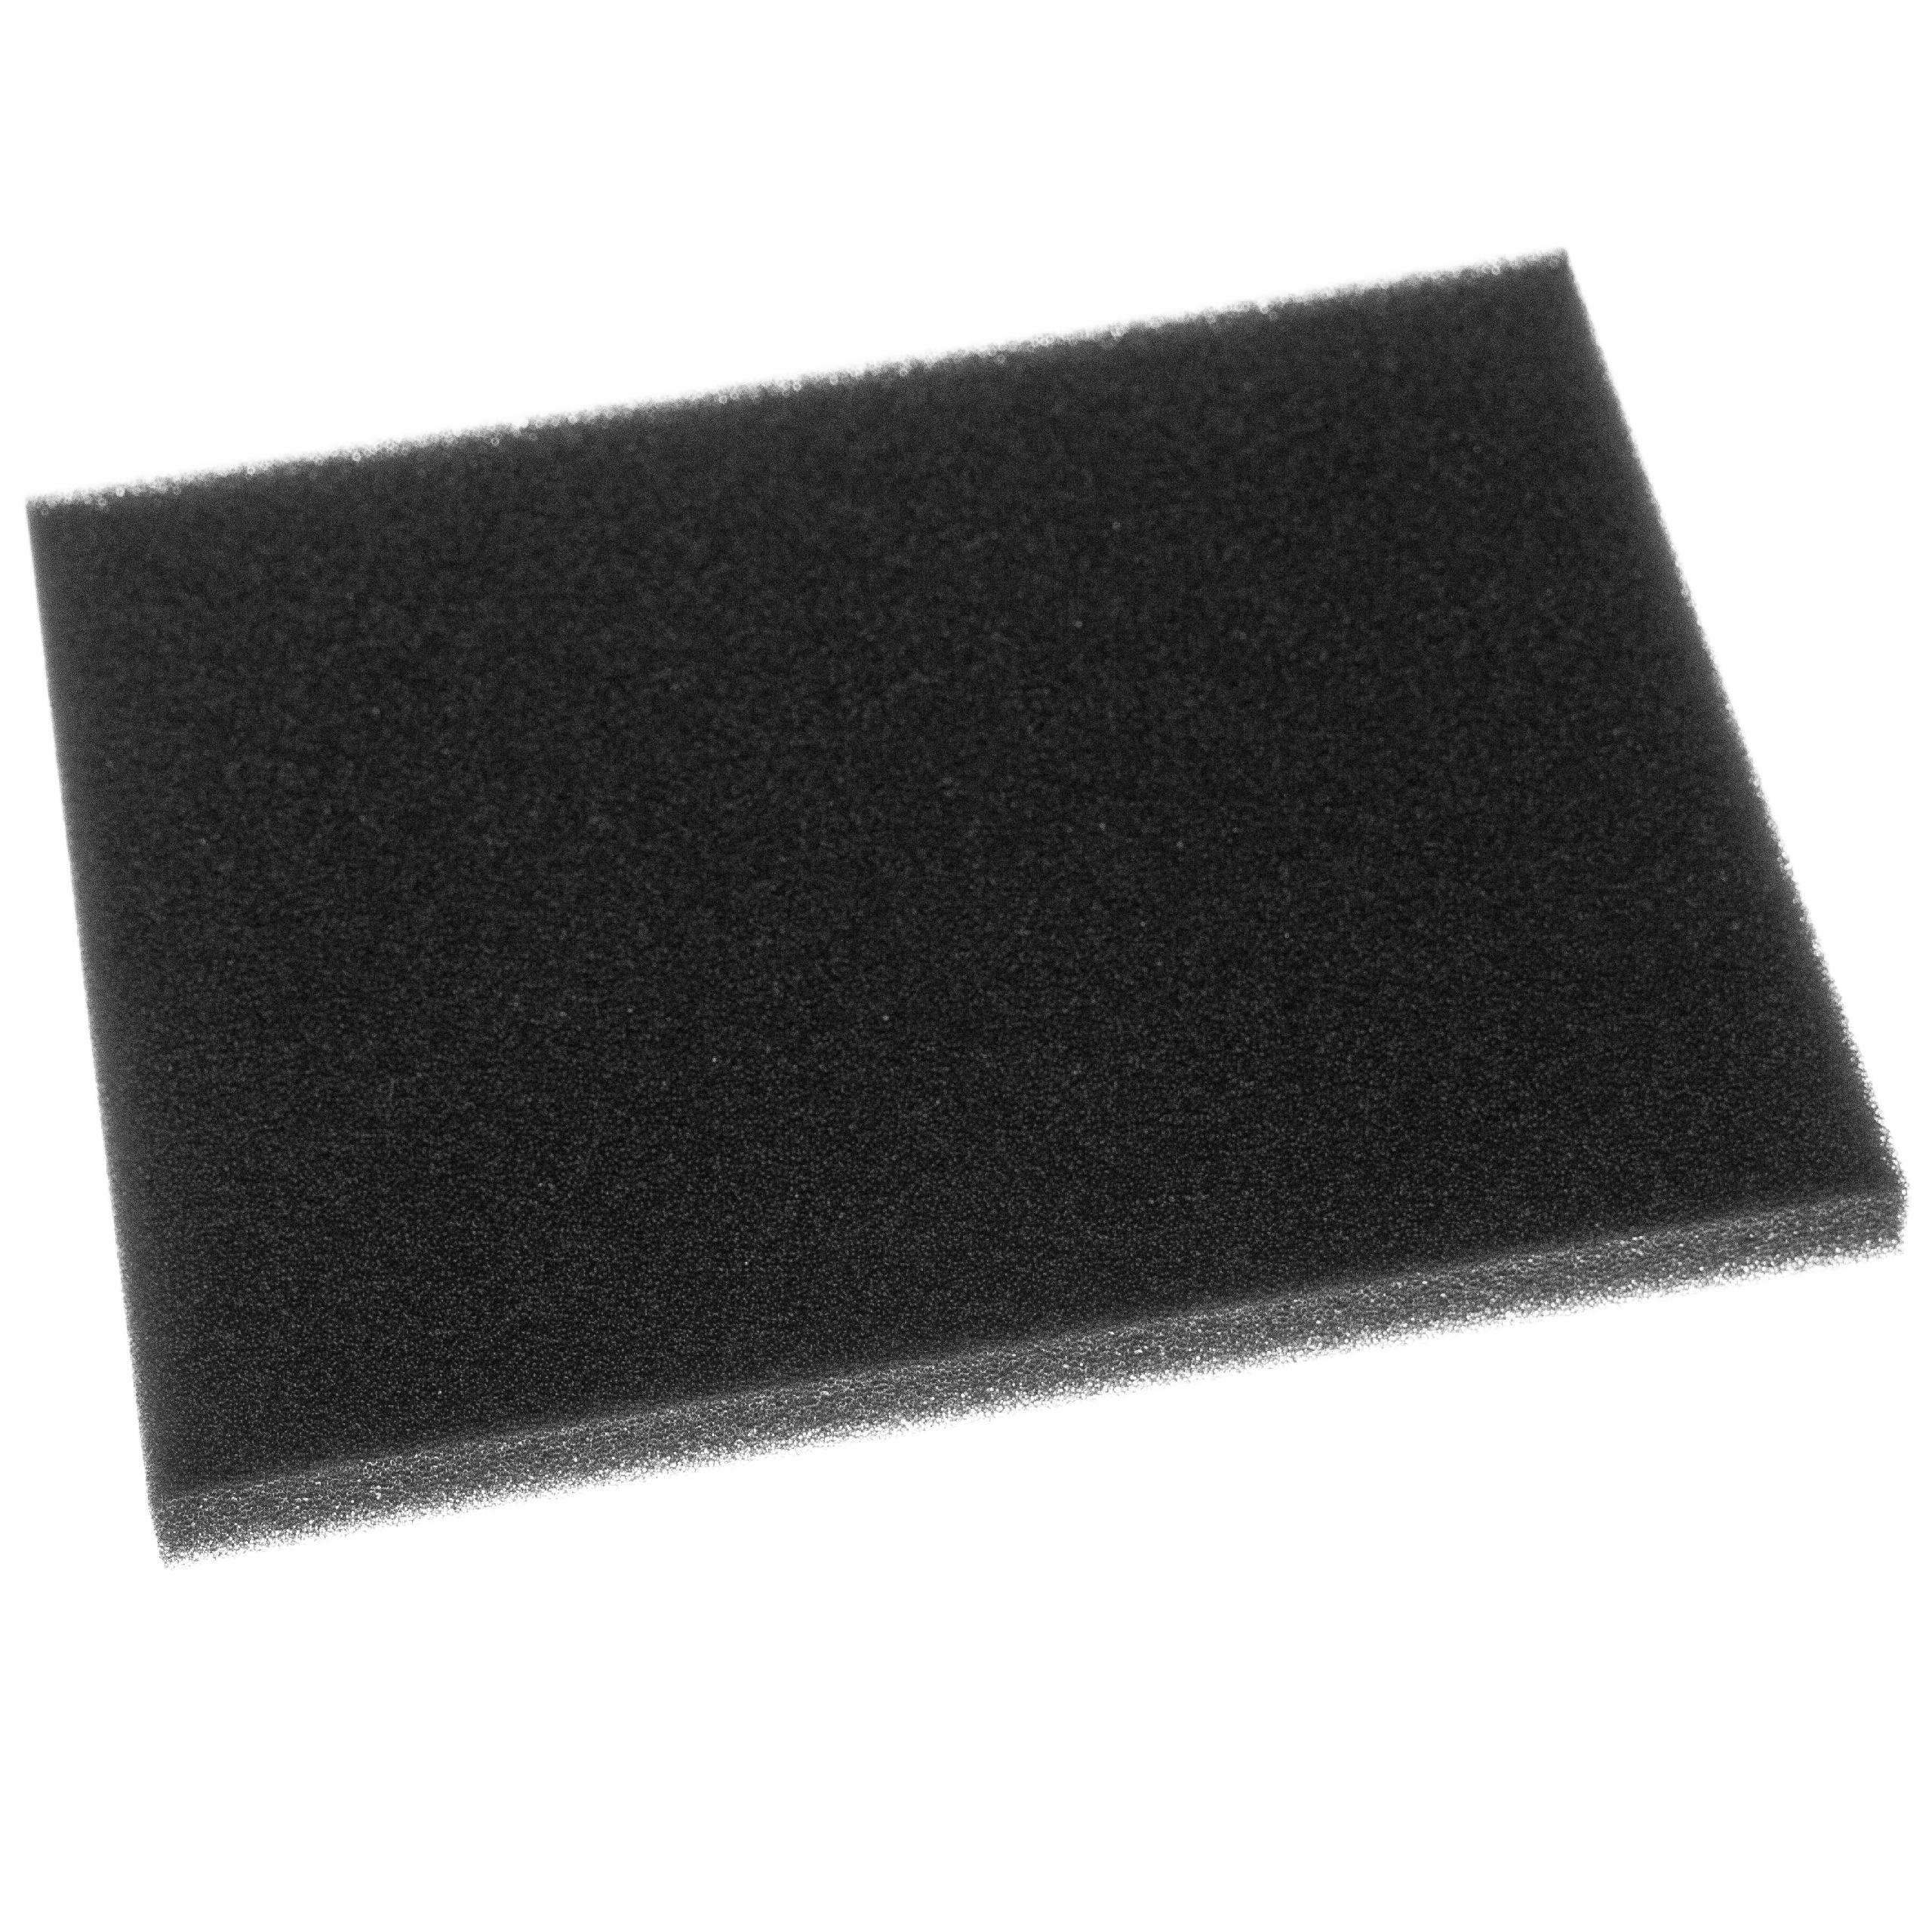 1x foam filter replaces Philips 432200039691 for Philips Vacuum Cleaner